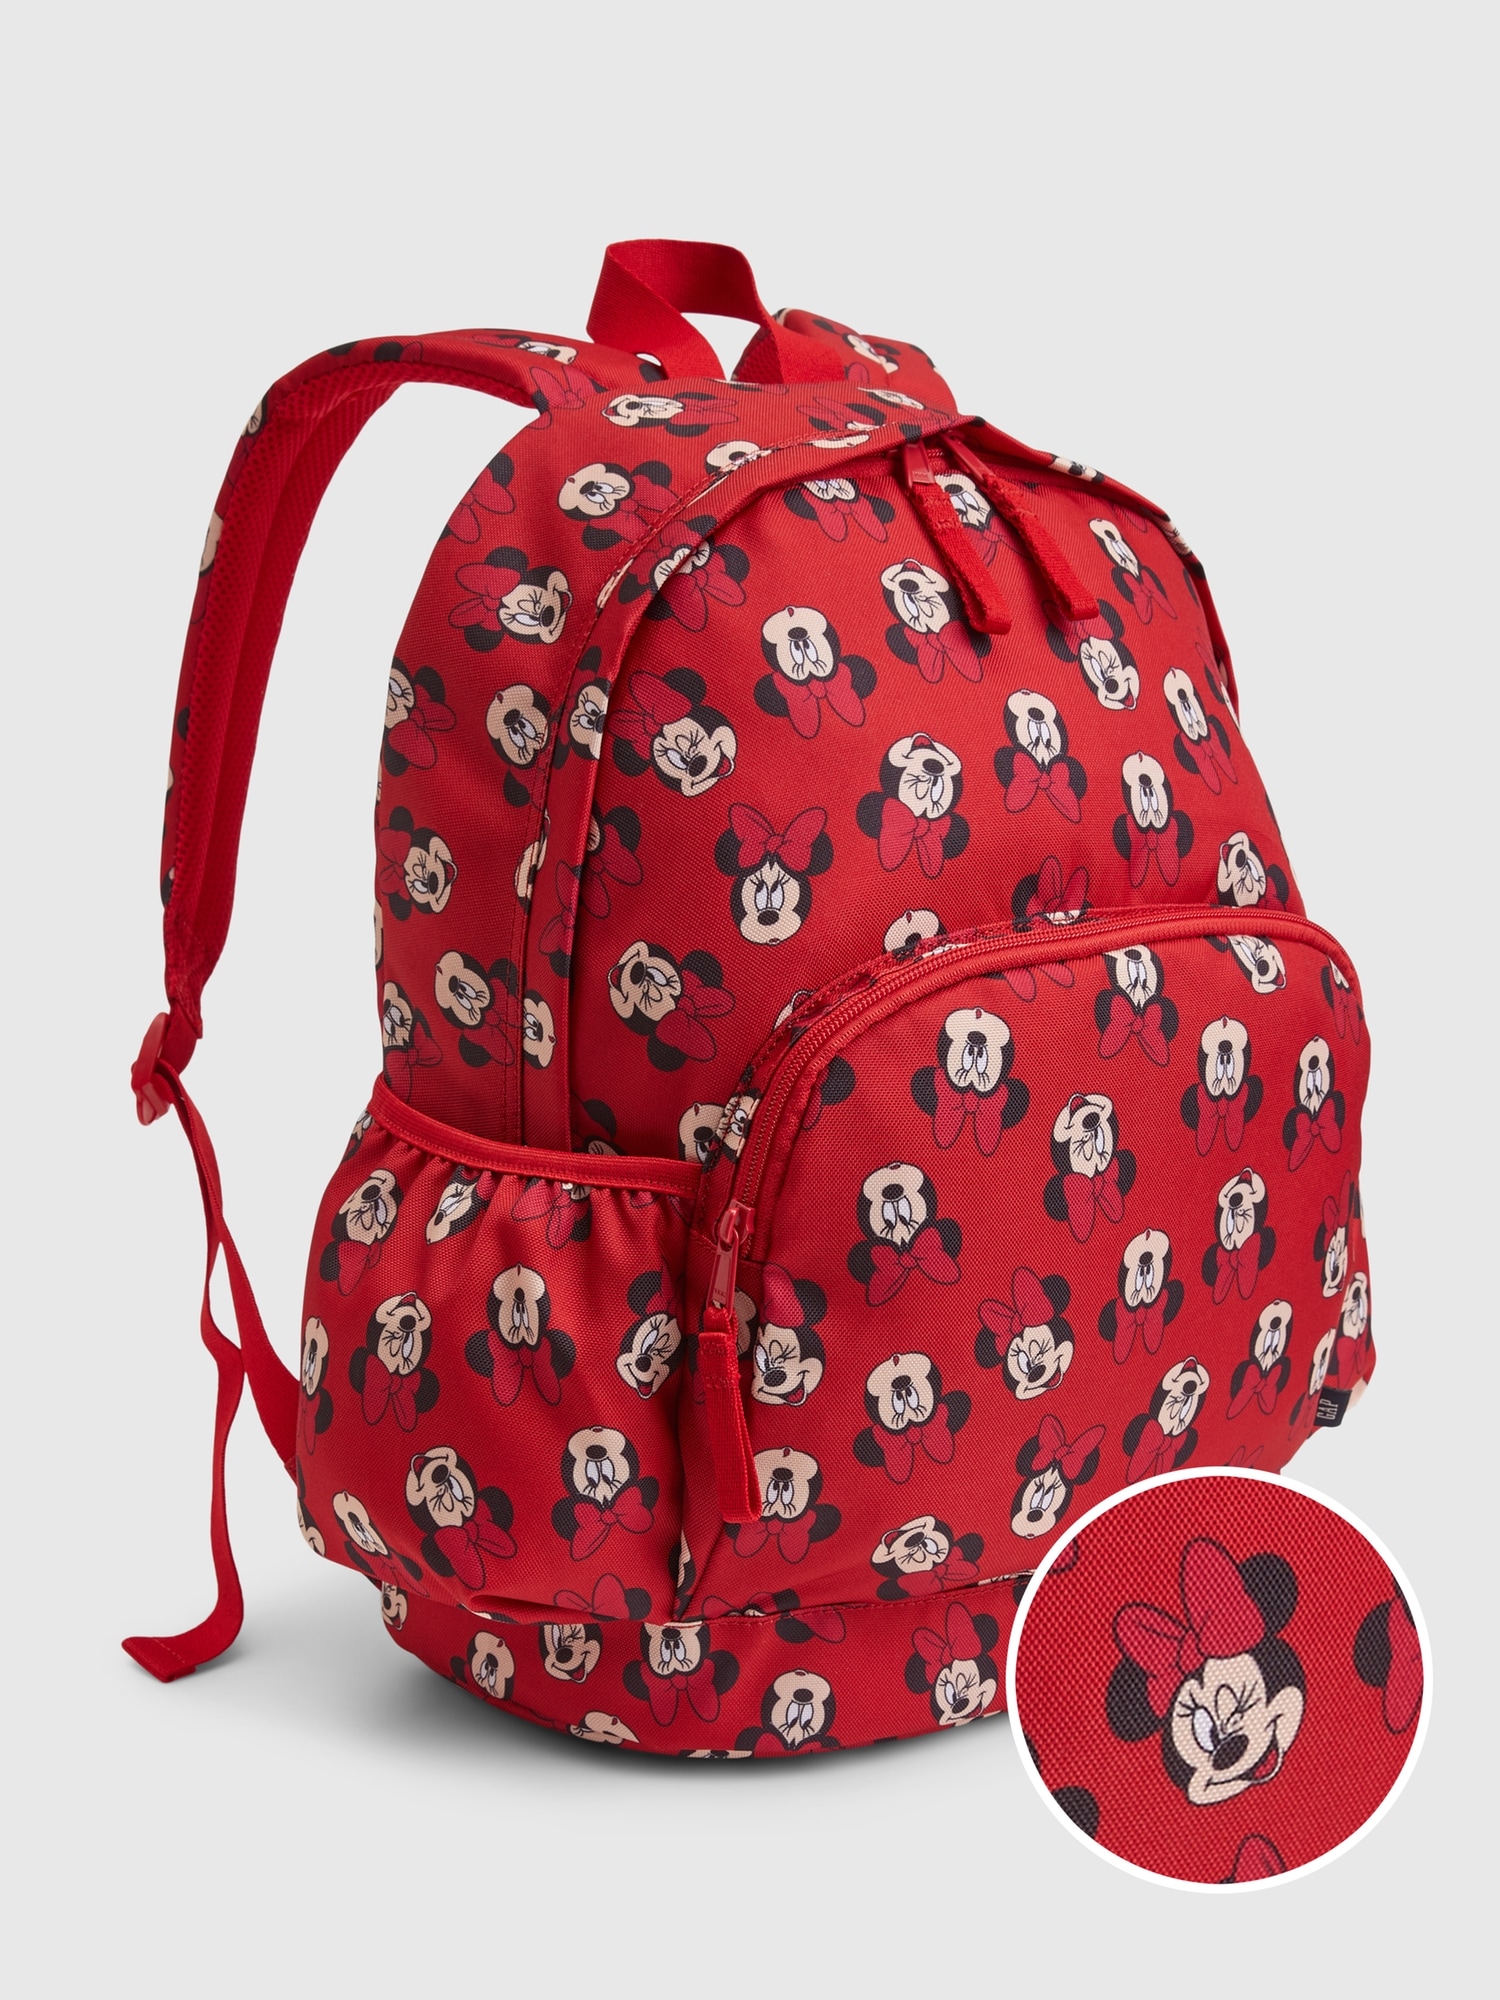 Gap Kids &#124 Disney Recycled Minnie Mouse Backpack red. 1